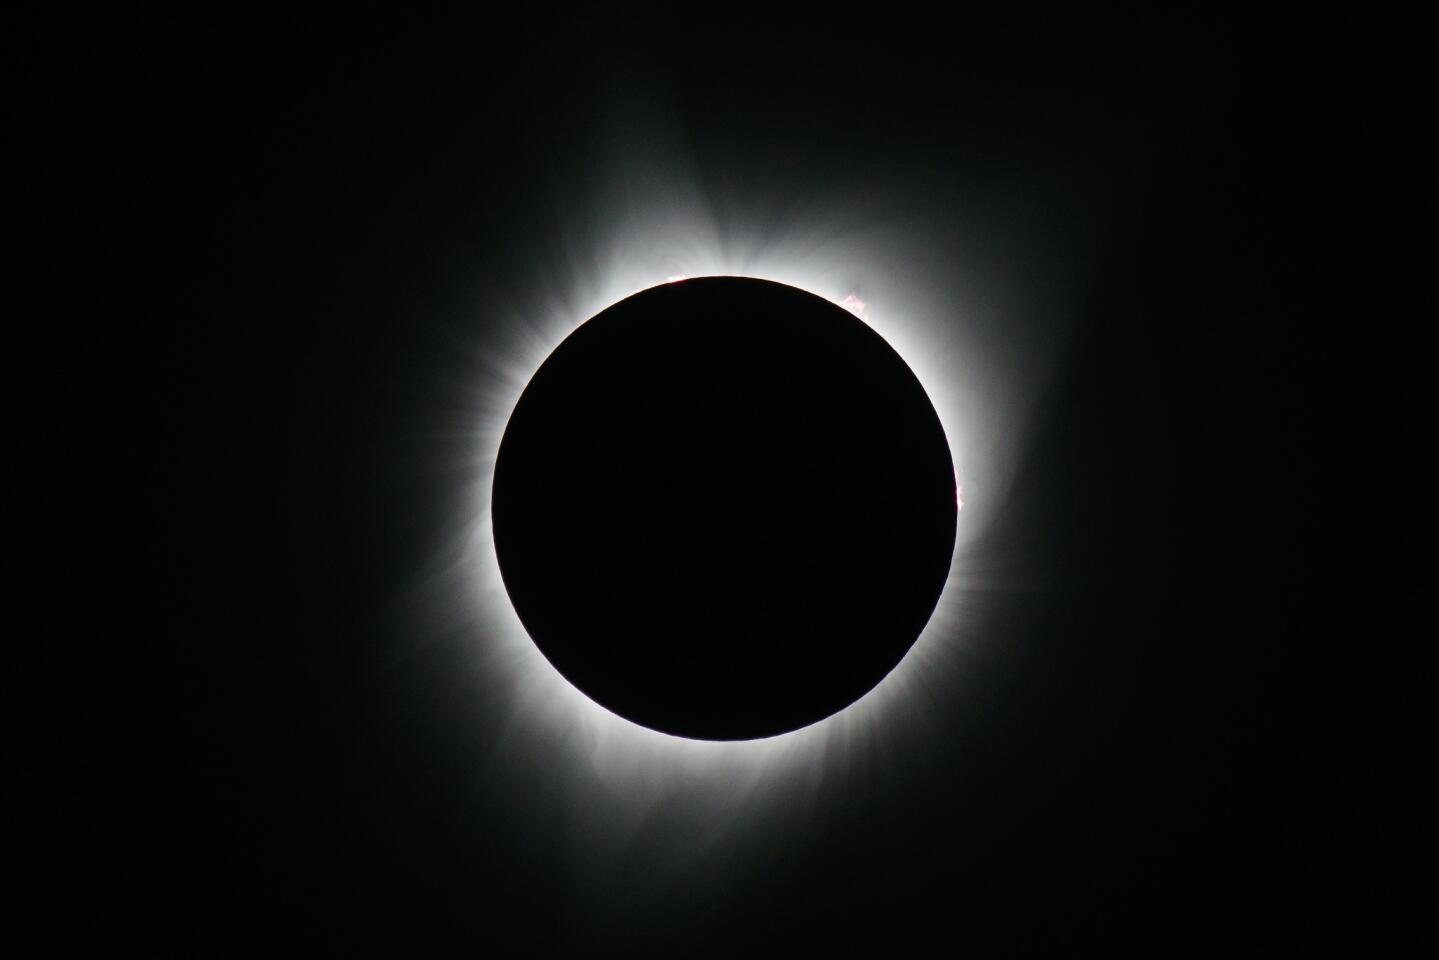 Oregon: In-camera multiple exposure of the phases of the solar eclipse from Salem.